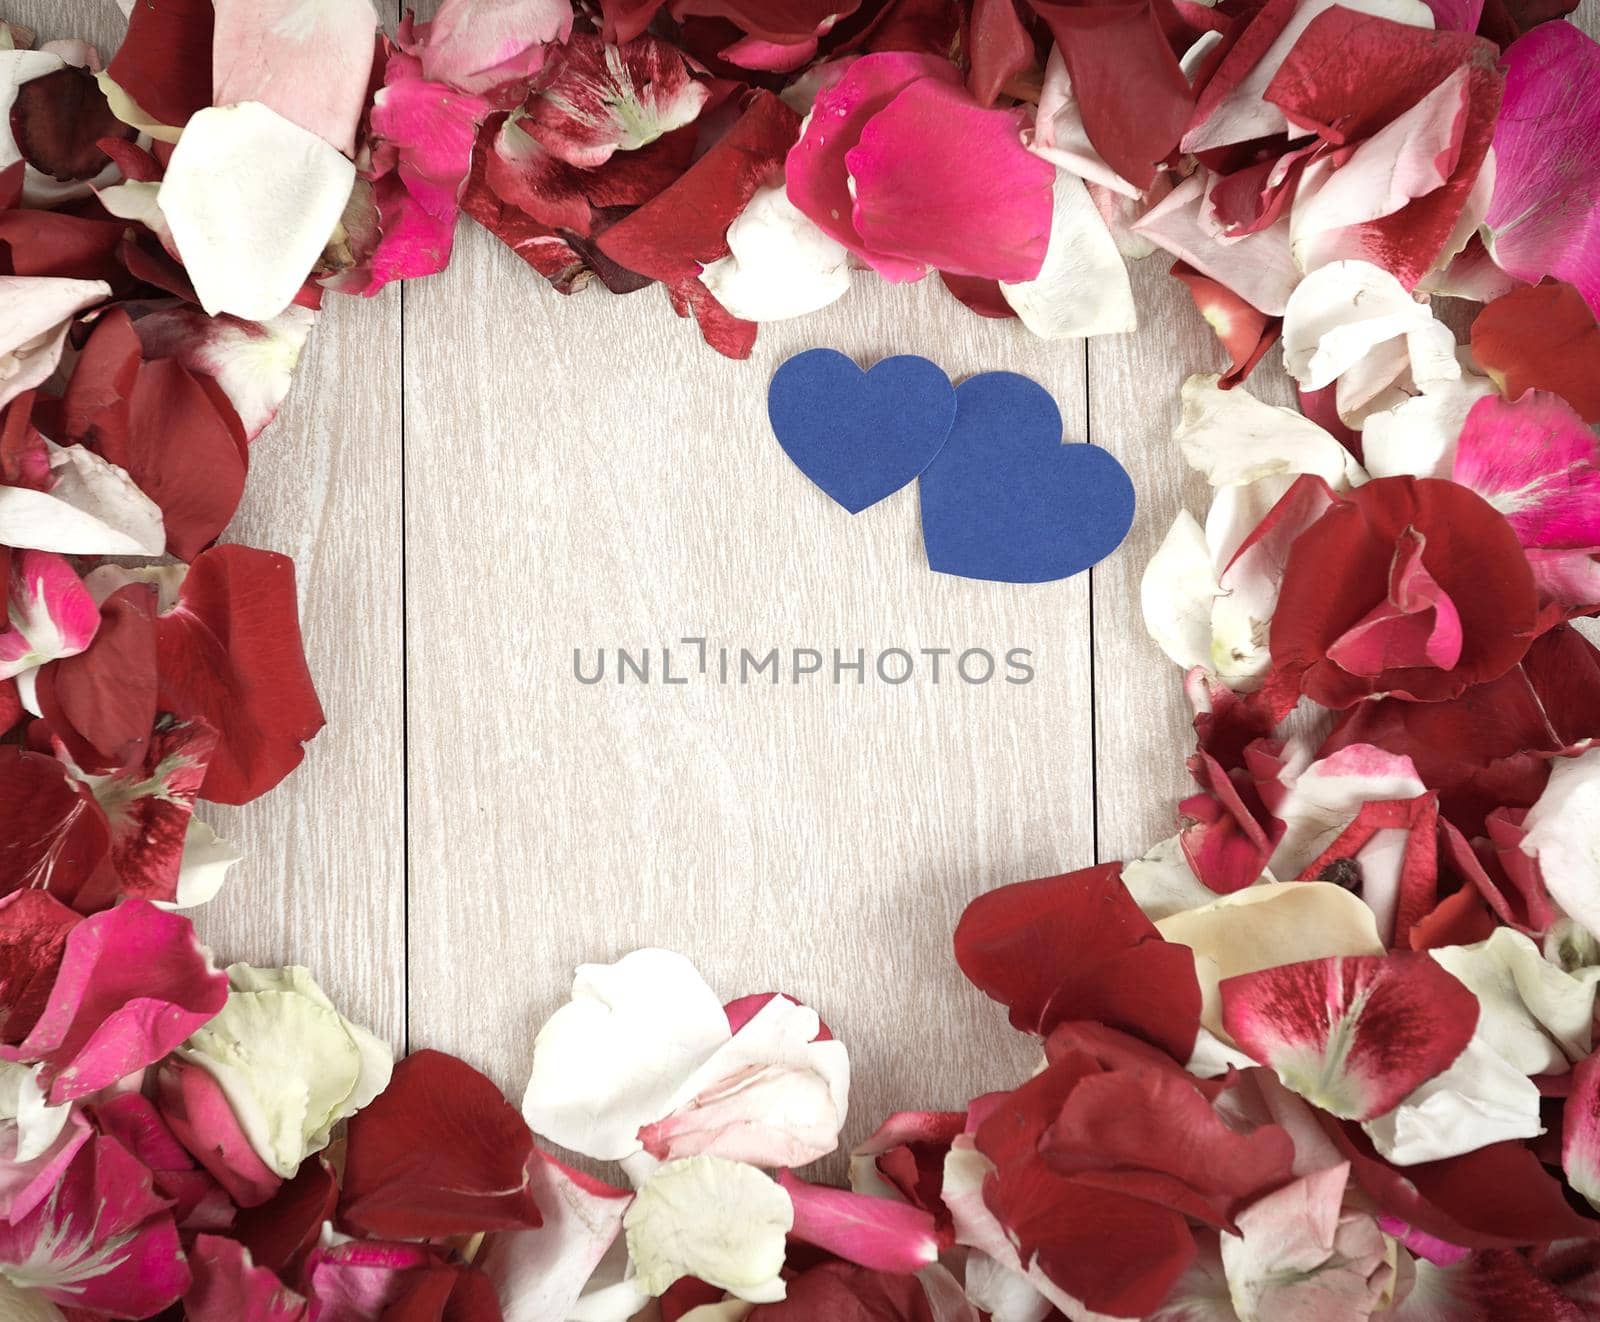 two blue hearts in a frame of rose petals on a wooden background by SmartPhotoLab